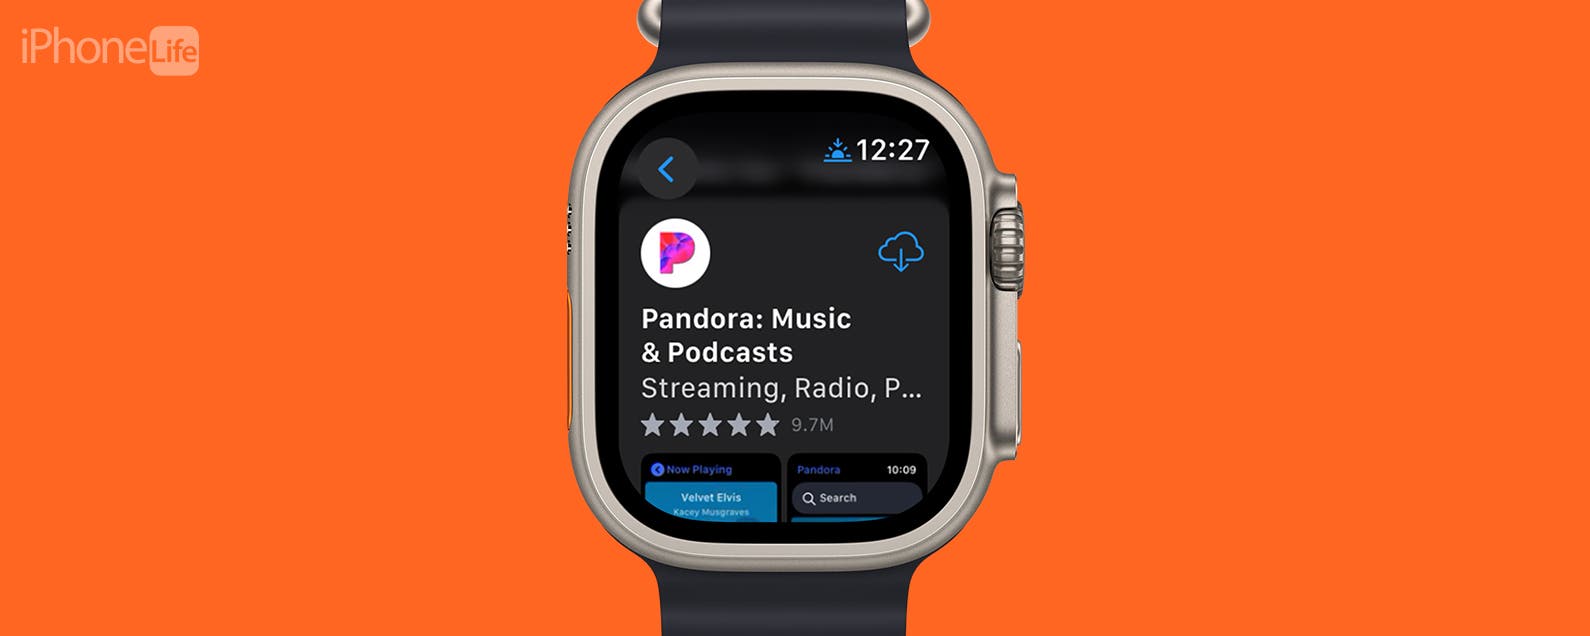 Use Now Playing on Apple Watch - Apple Support